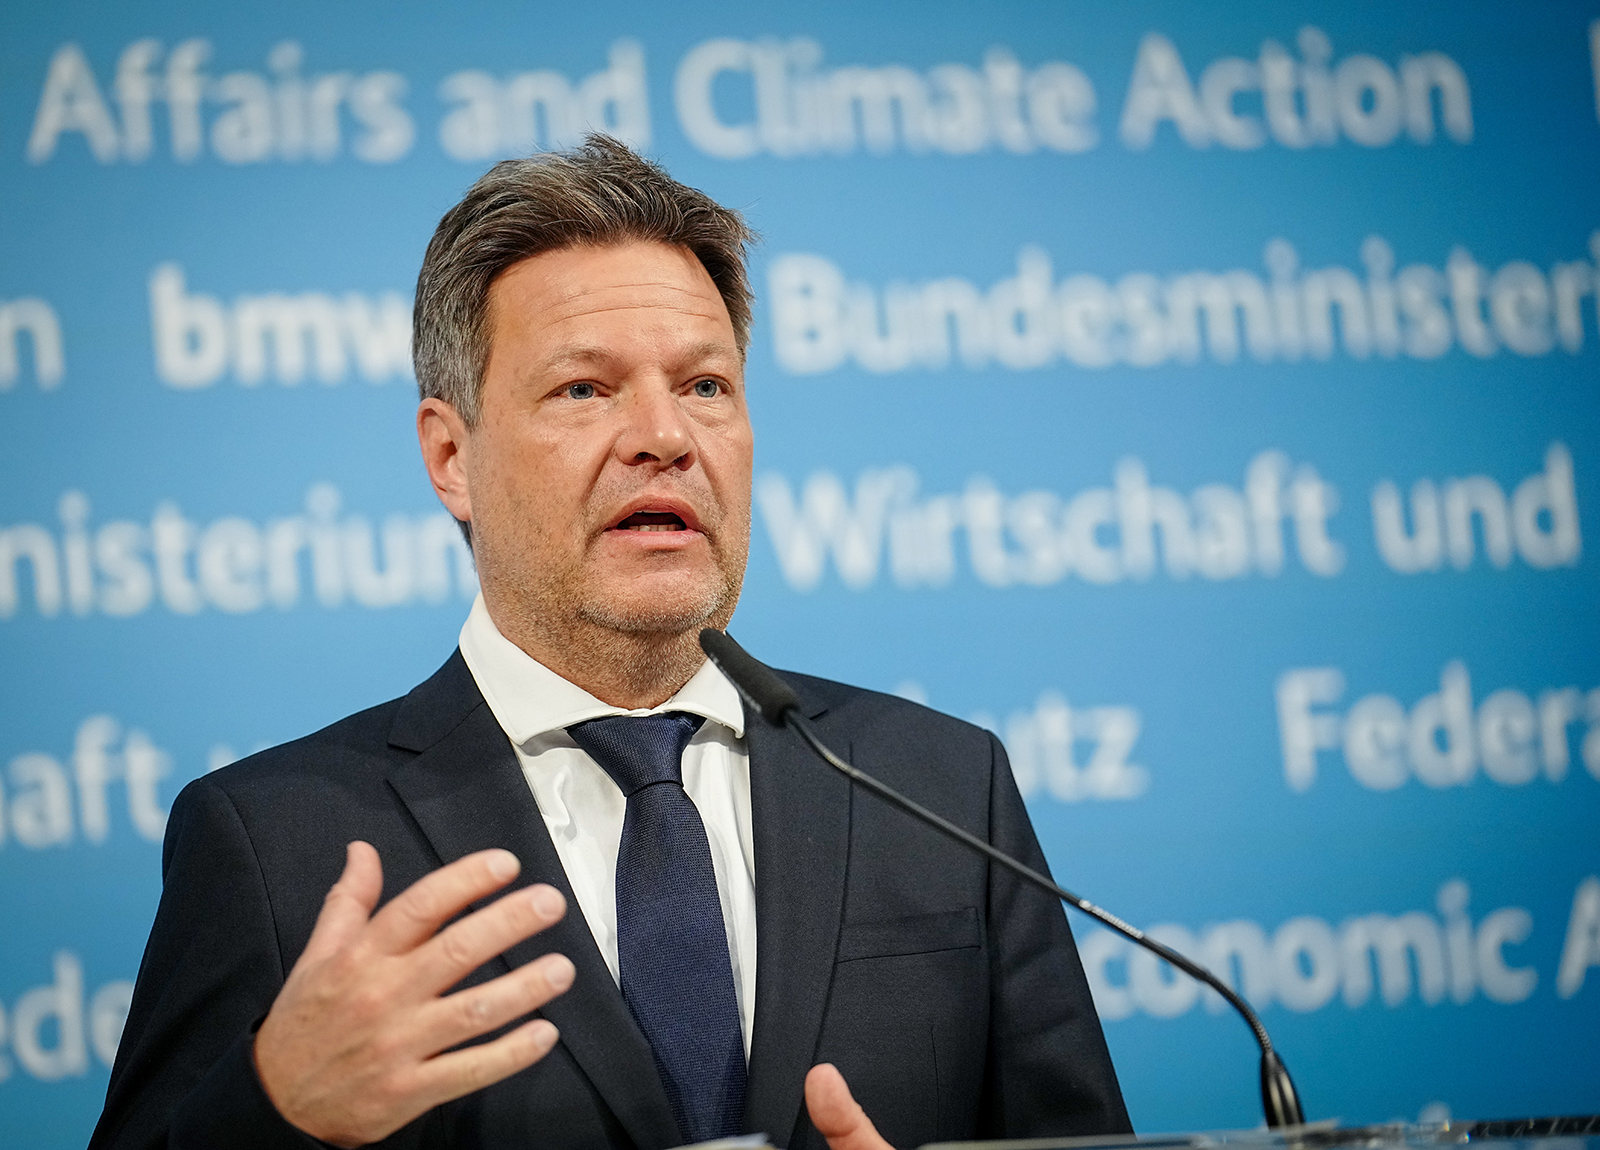 Robert Habeck, Federal Minister for Economic Affairs and Climate Protection, holds a press conference at his ministry on energy security in Berlin, Germany, on March 30.